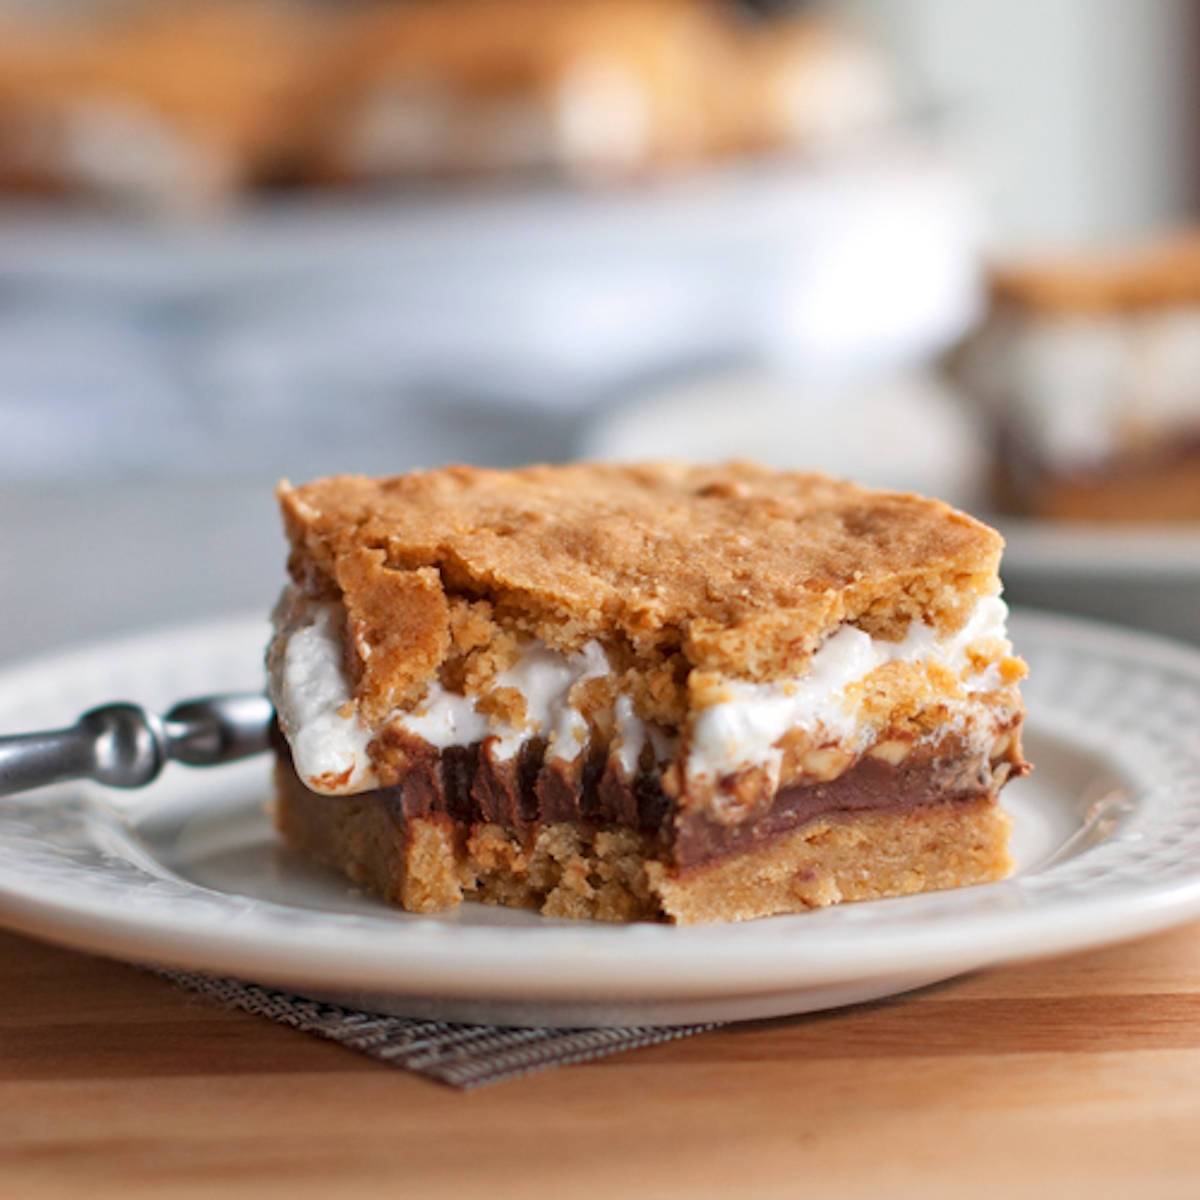 These s'mores bars have peanut butter layered in between marshmallow fluff, chocolate, and a graham cookie base. Just like s'mores! | pinchofyum.com